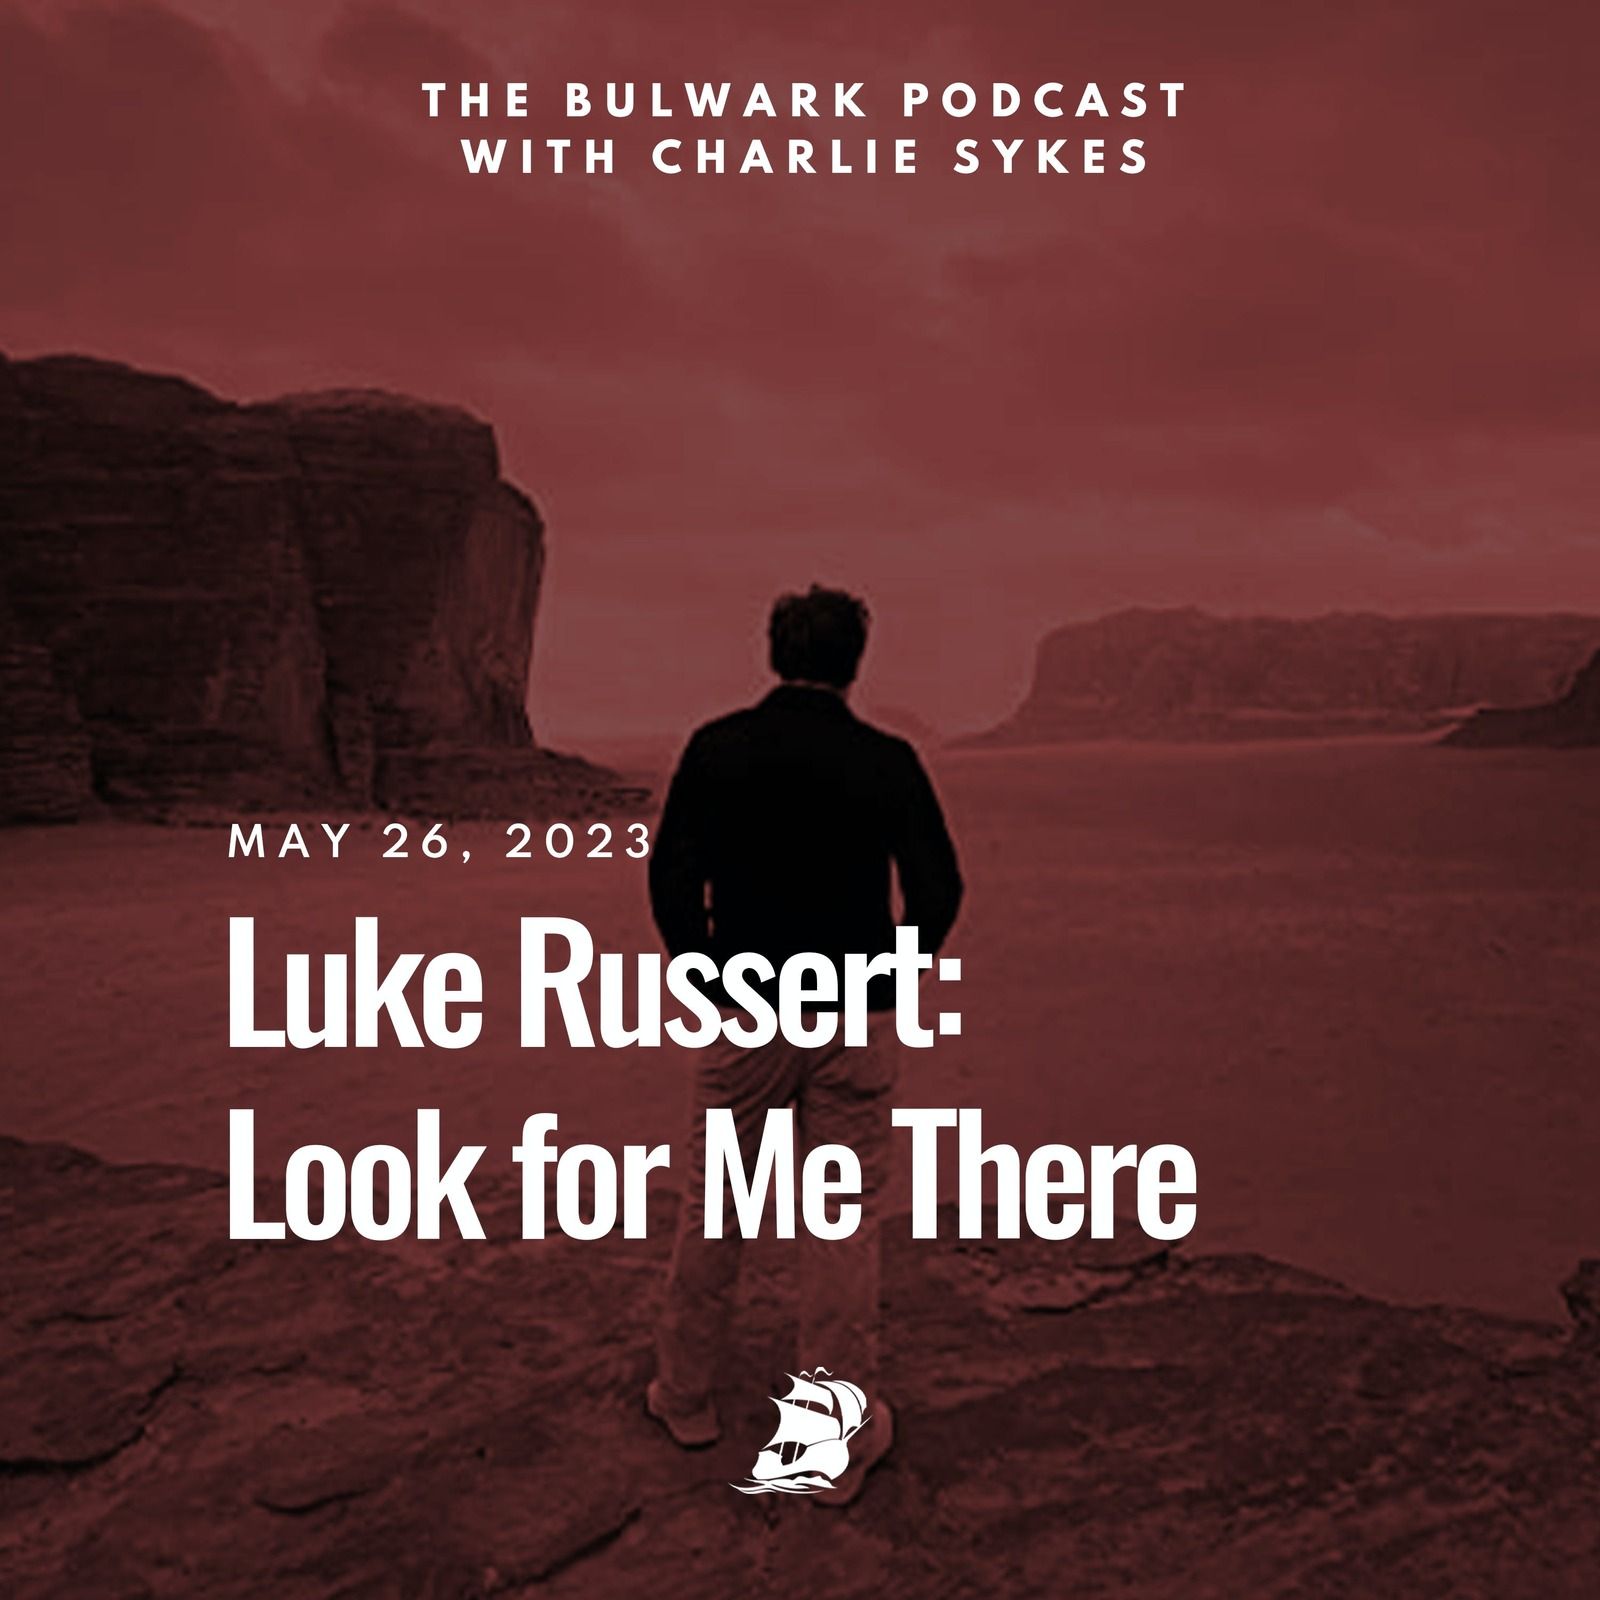 Luke Russert: Look for Me There